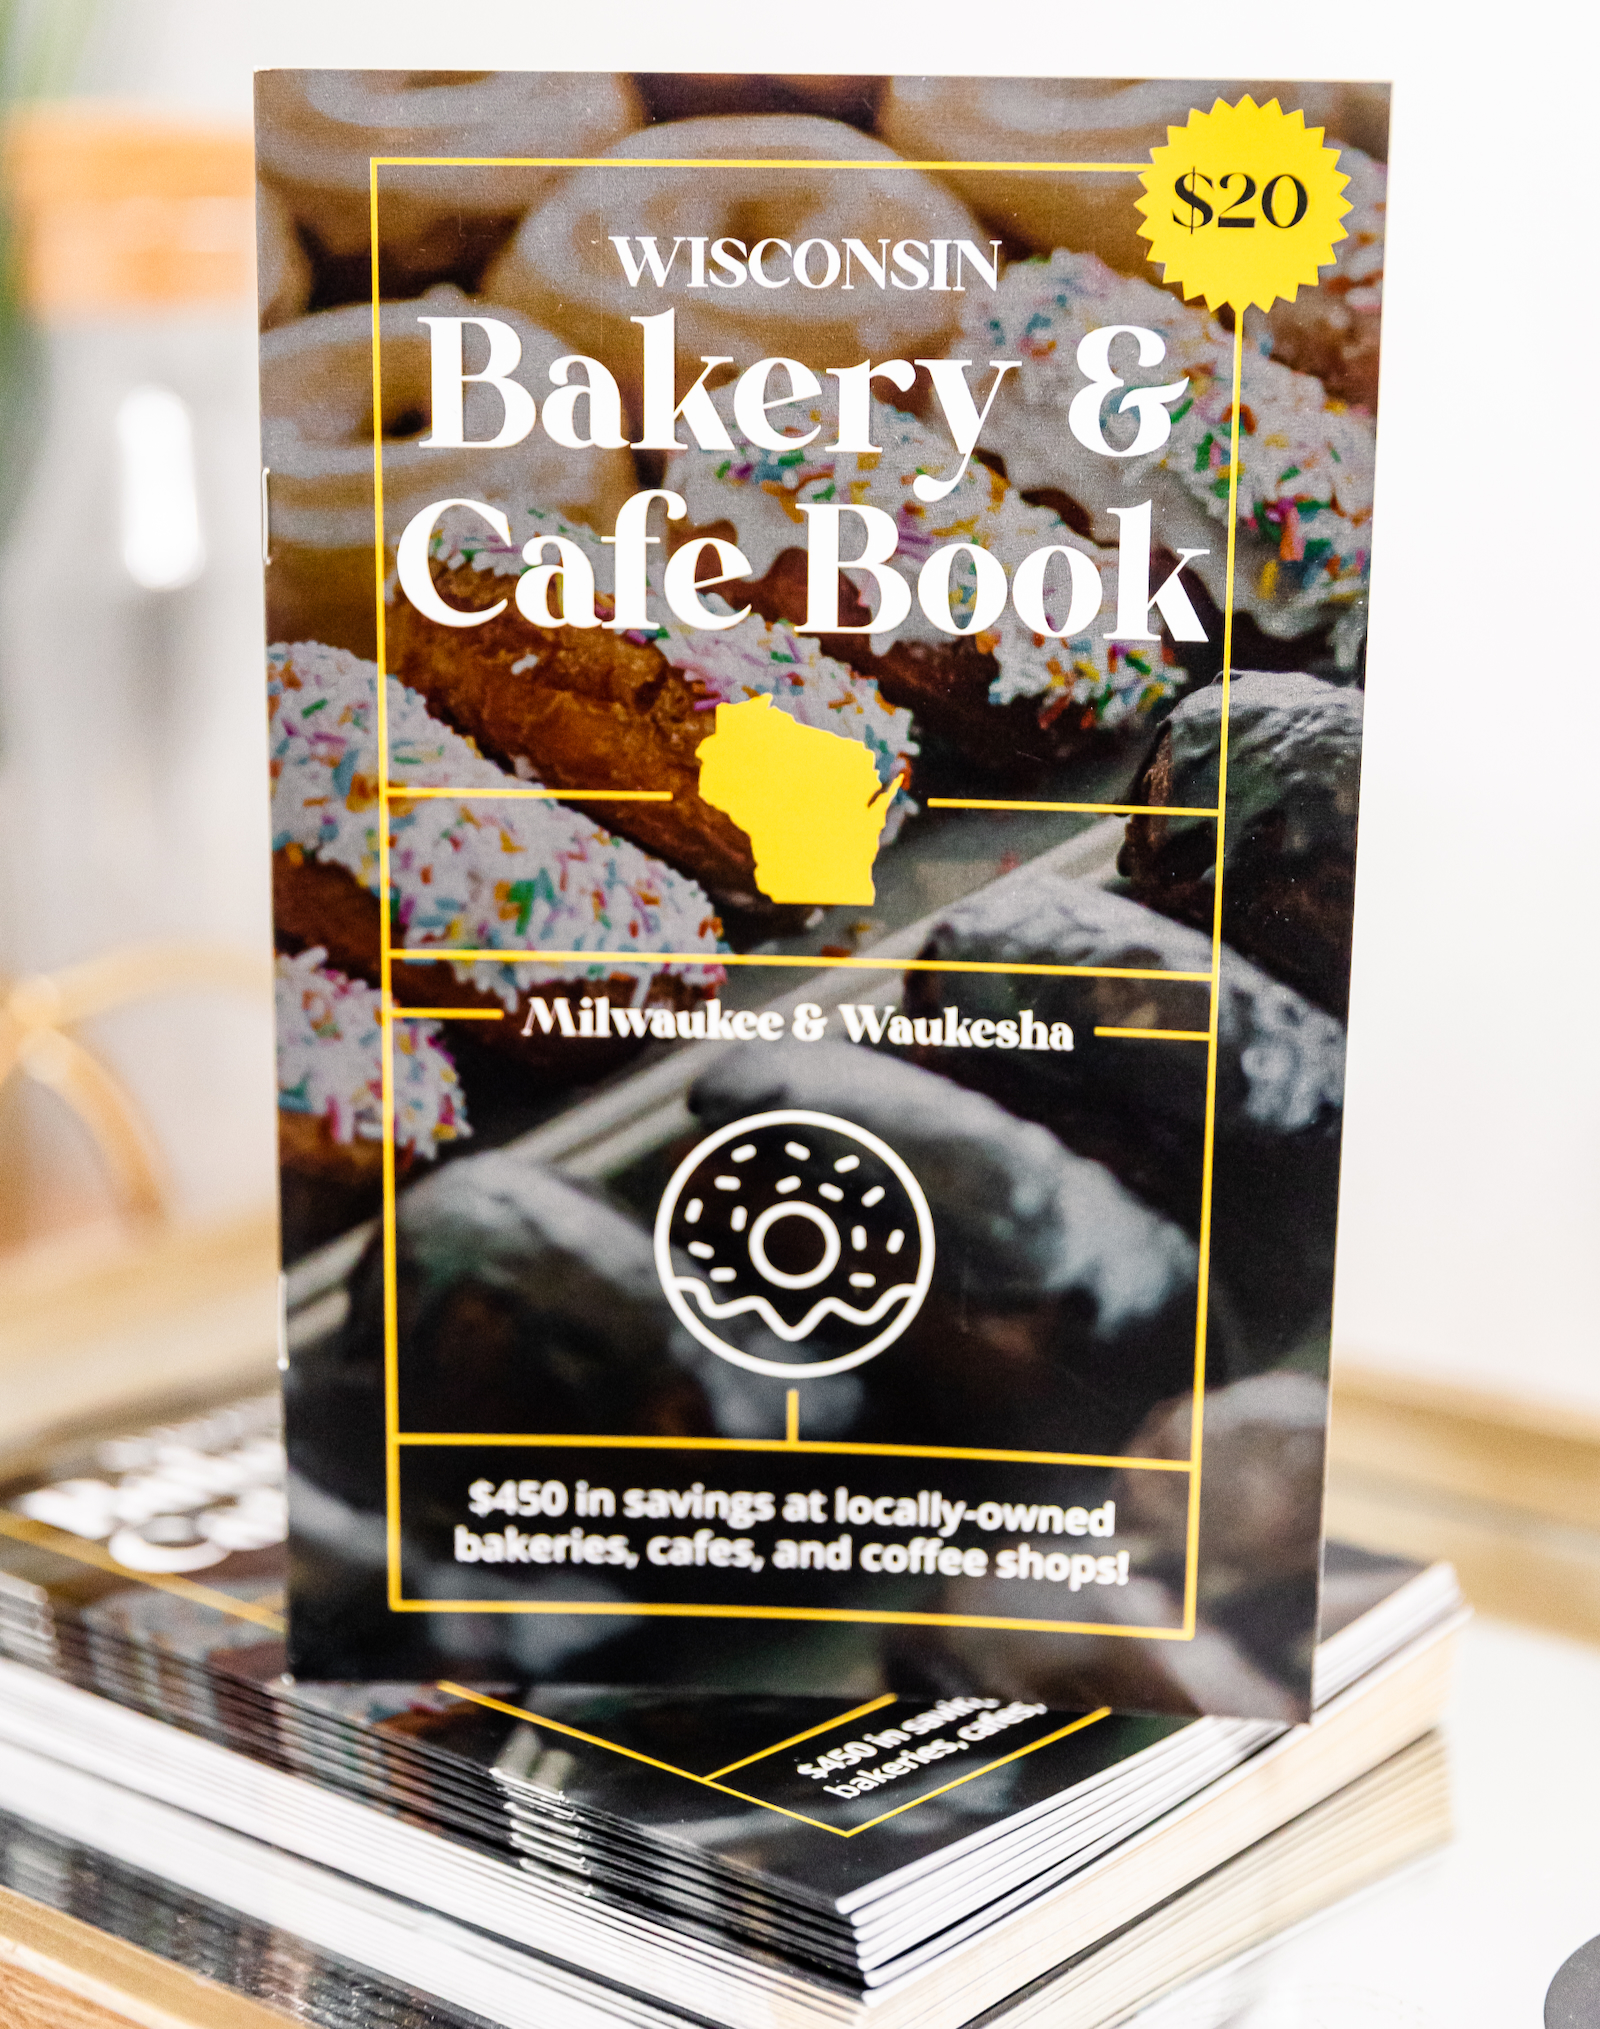 Wisconsin Bakery & Cafe Book